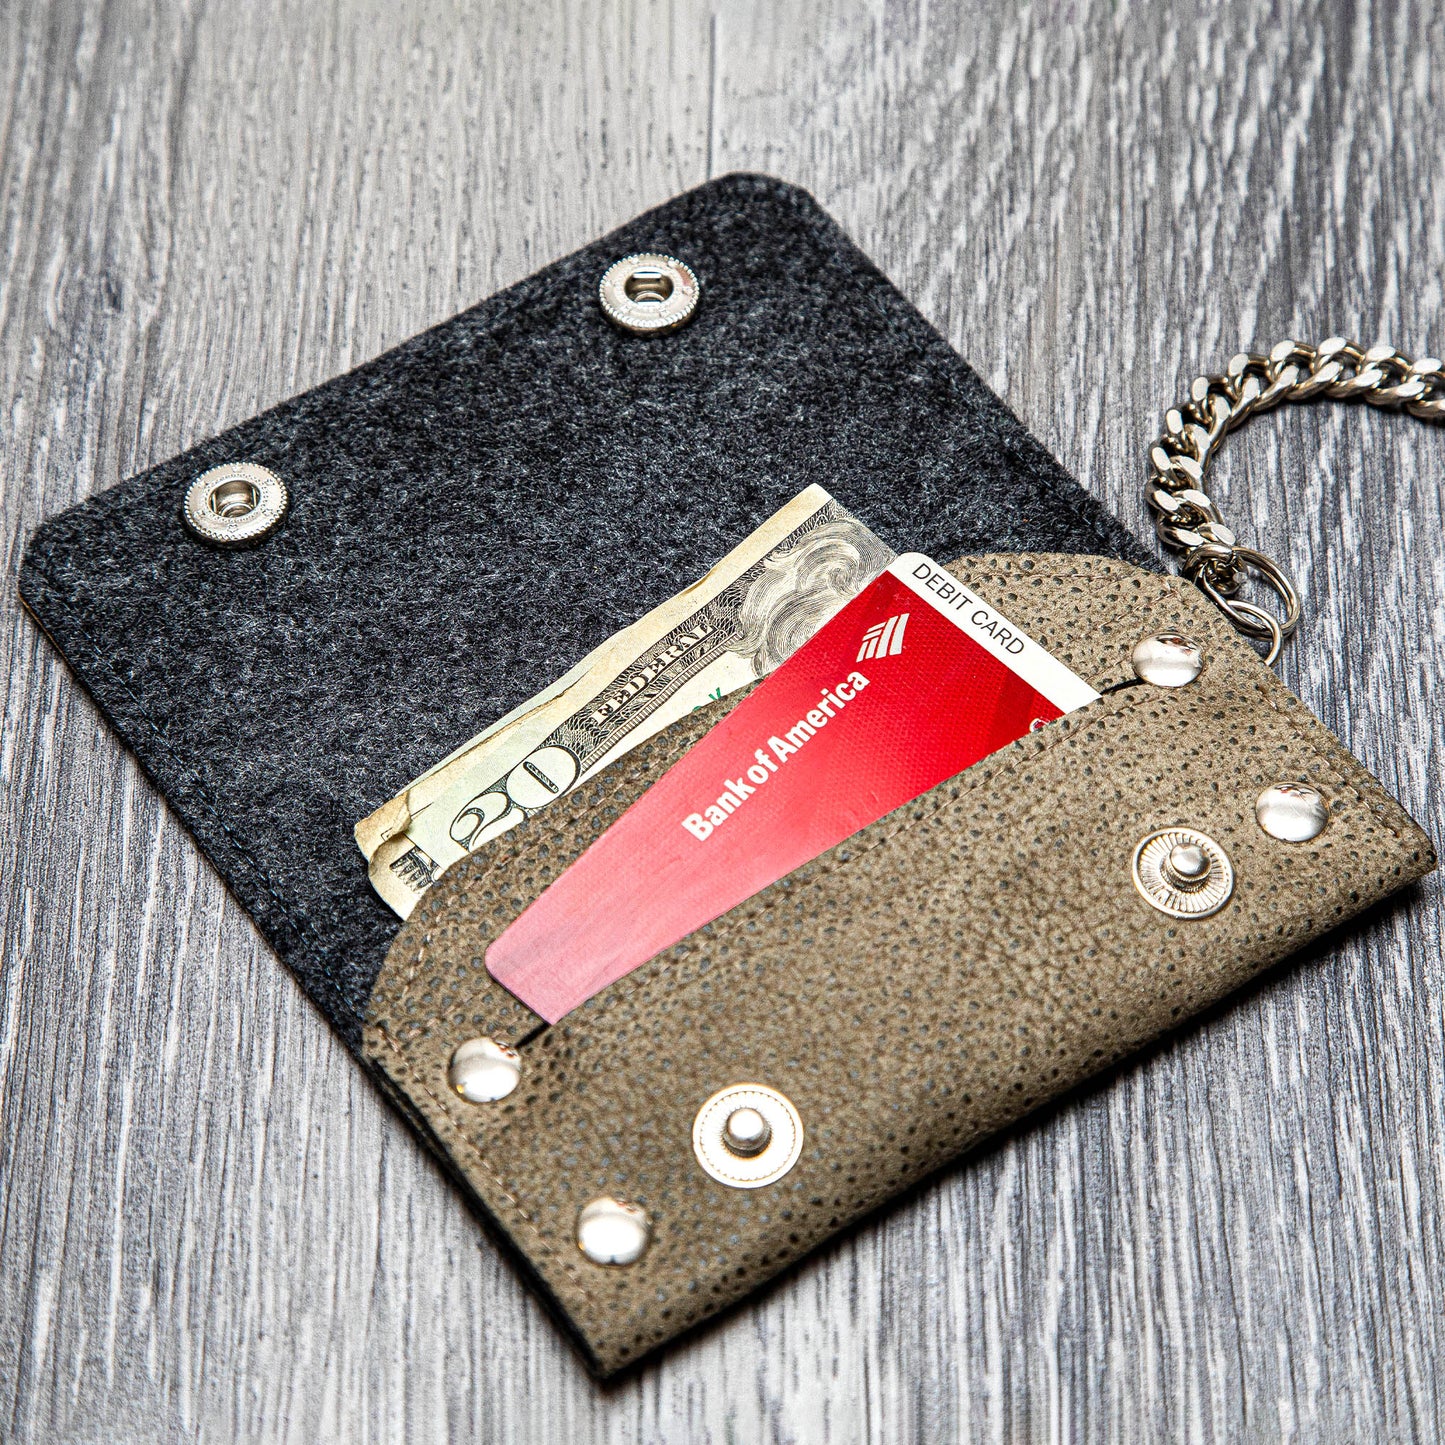 Handcrafted Biker Wallet with Detachable Chain - Cruelty-Free and Fashionably Functional - Brown Faux Leather